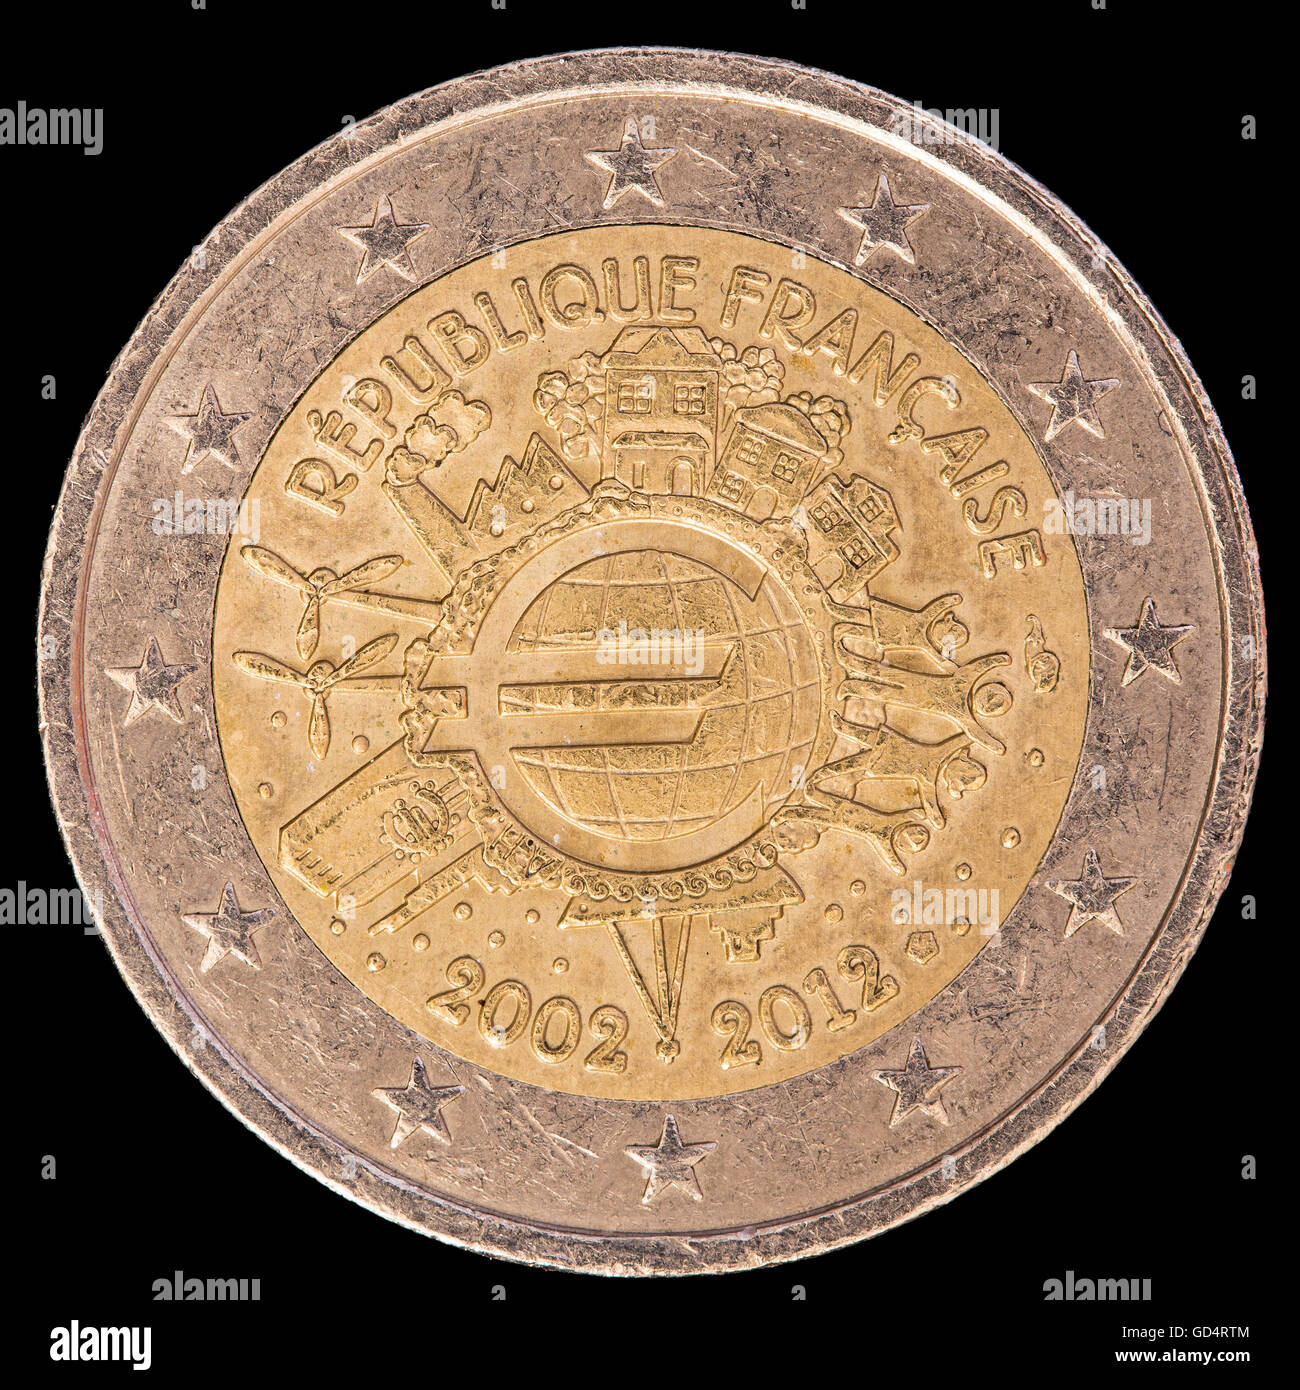 A commemorative circulated two euro coin issued by France in 2012 and celebrating the ten years of the Euro. Image isolated on b Stock Photo